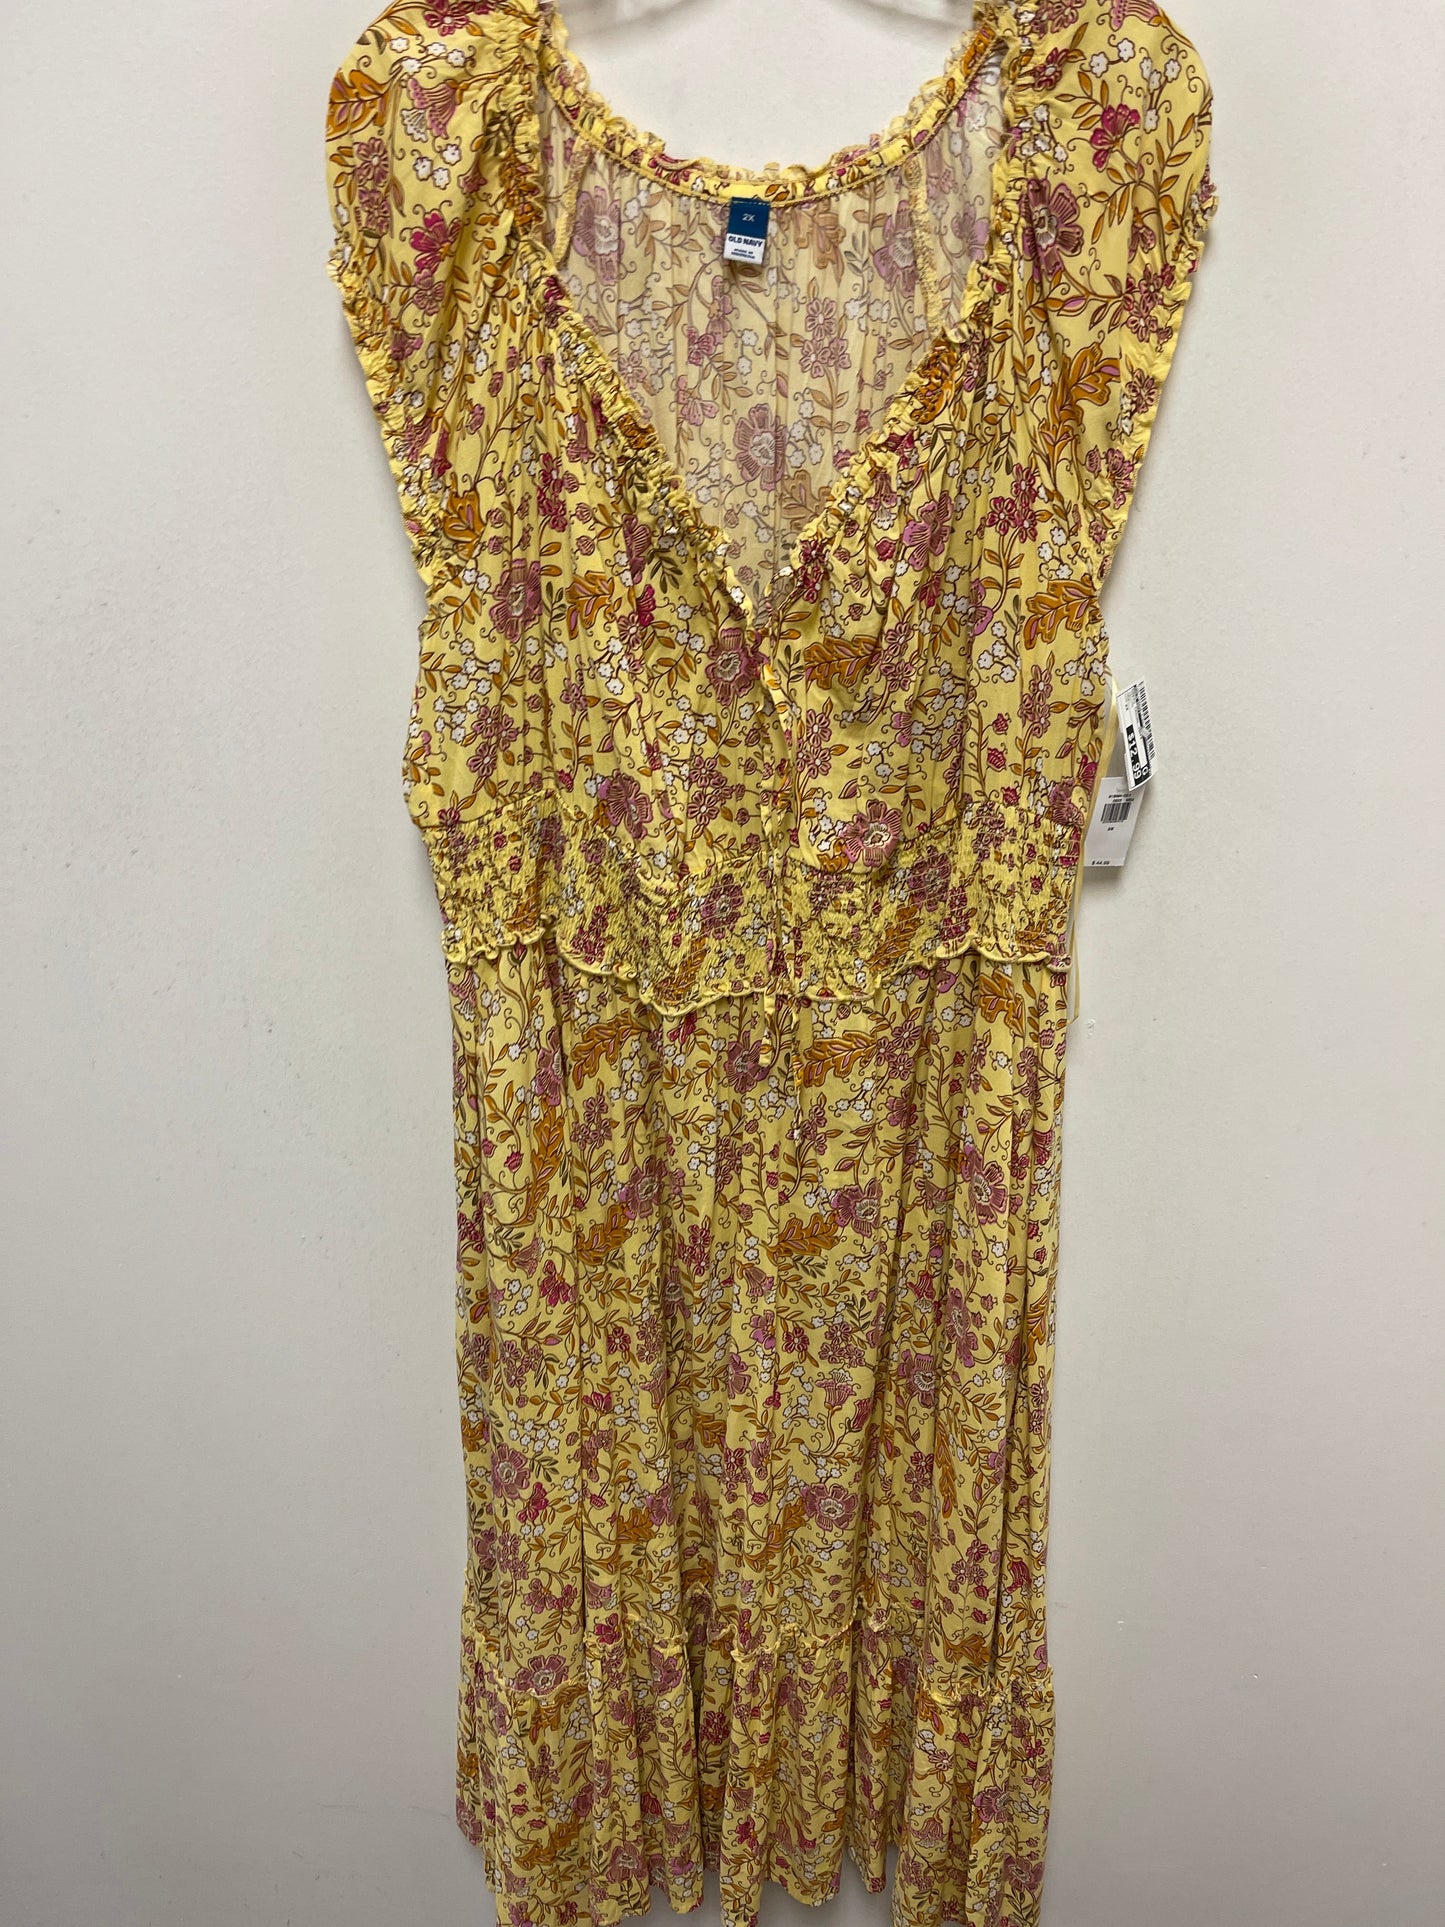 Yellow Dress Casual Maxi Old Navy, Size 2x